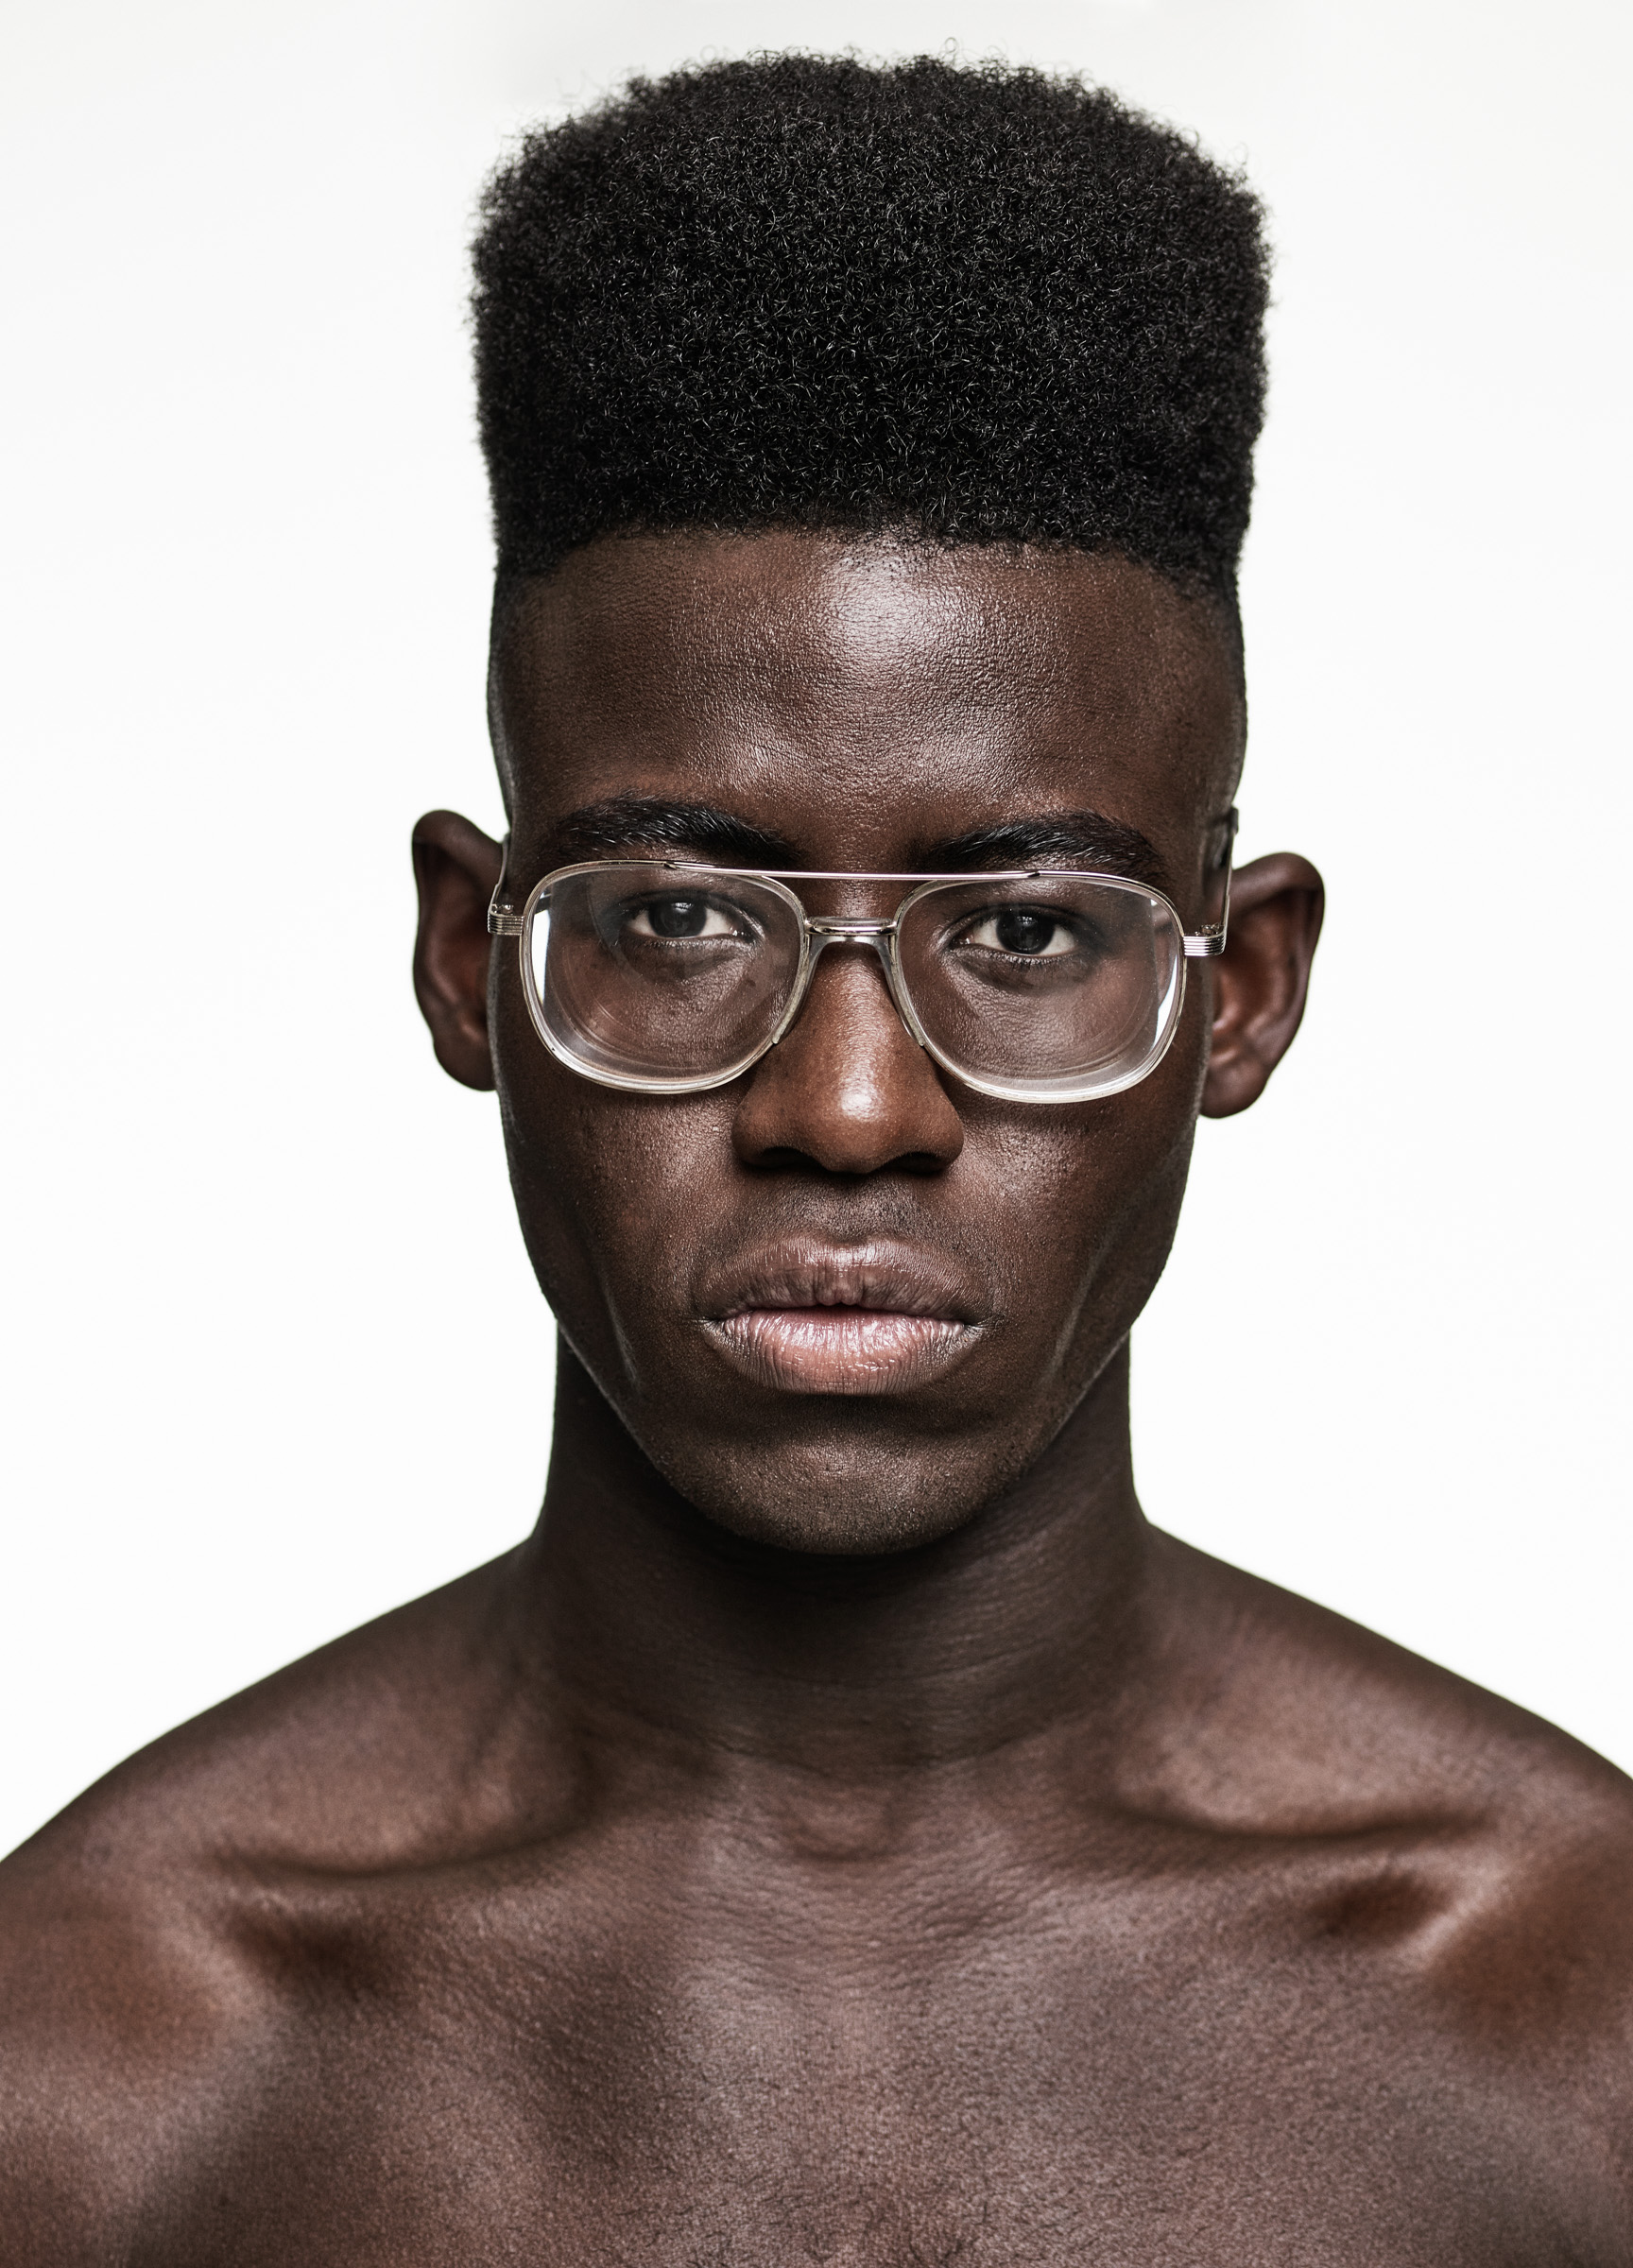 A black man with a flat top hair style by Hooker and Young